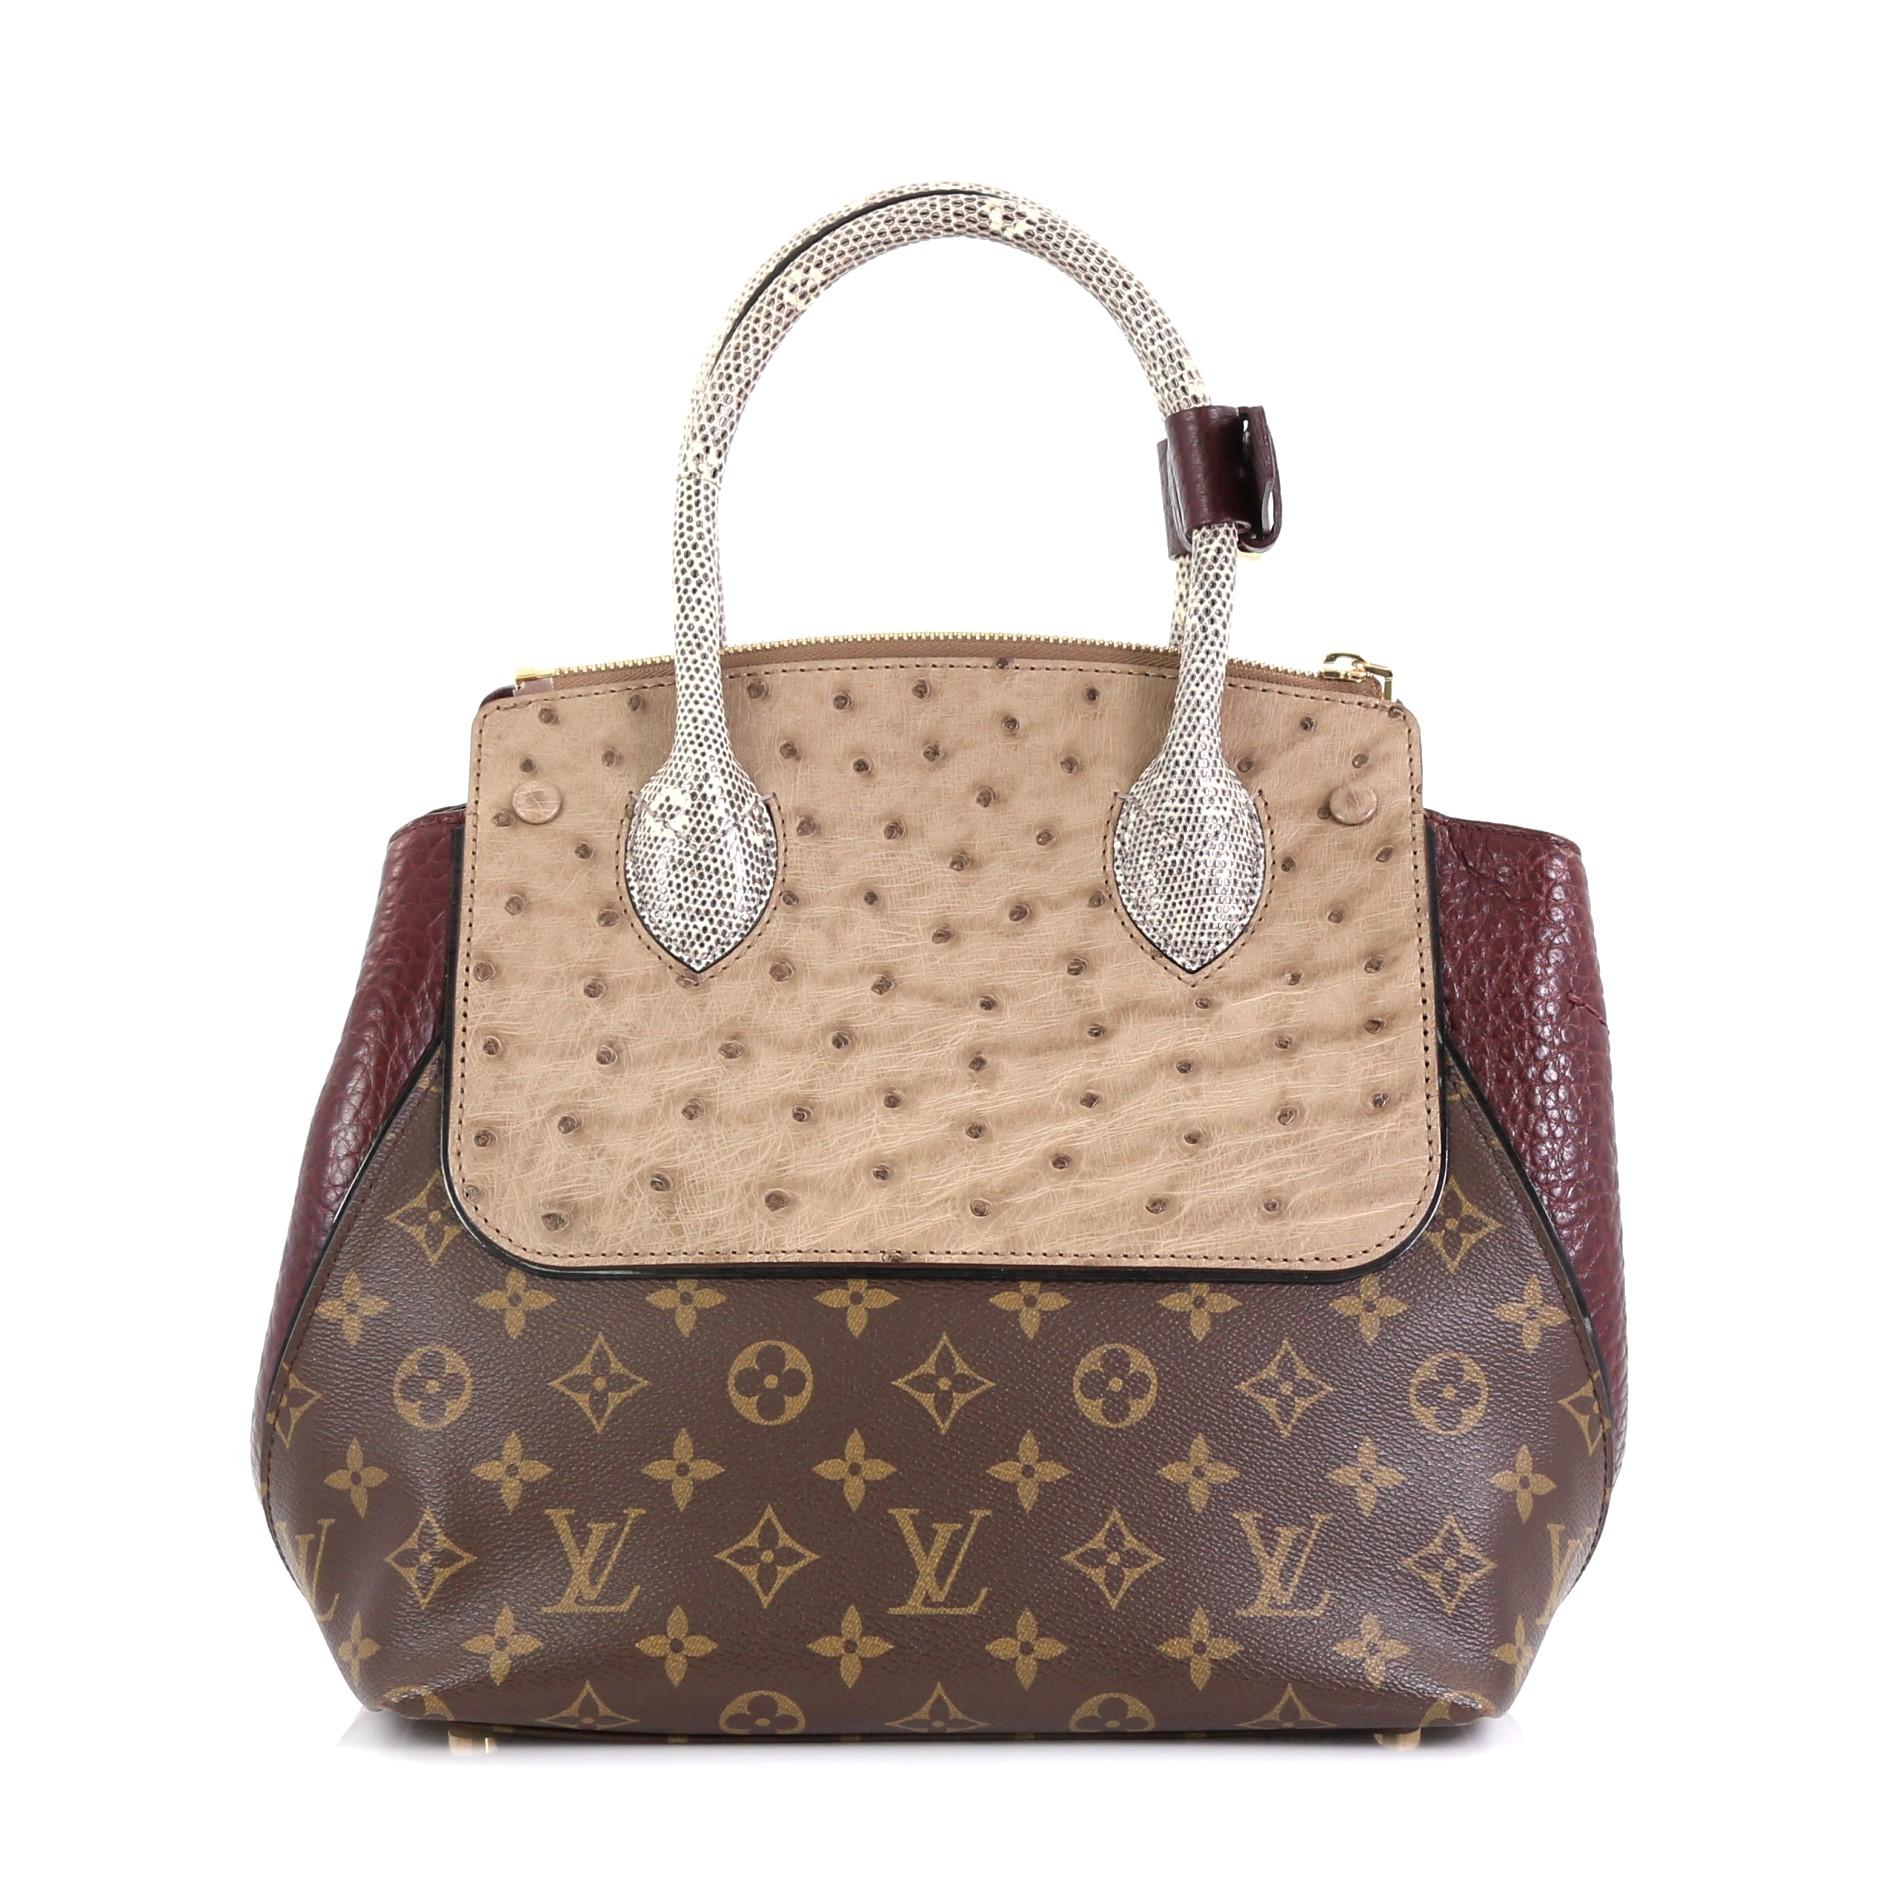 This Louis Vuitton Majestueux Tote Monogram Canvas and Exotics PM, crafted in brown monogram coated canvas and exotics, features dual rolled handles, protective base studs, and gold-tone hardware. Its S-lock and zip closure opens to a red leather